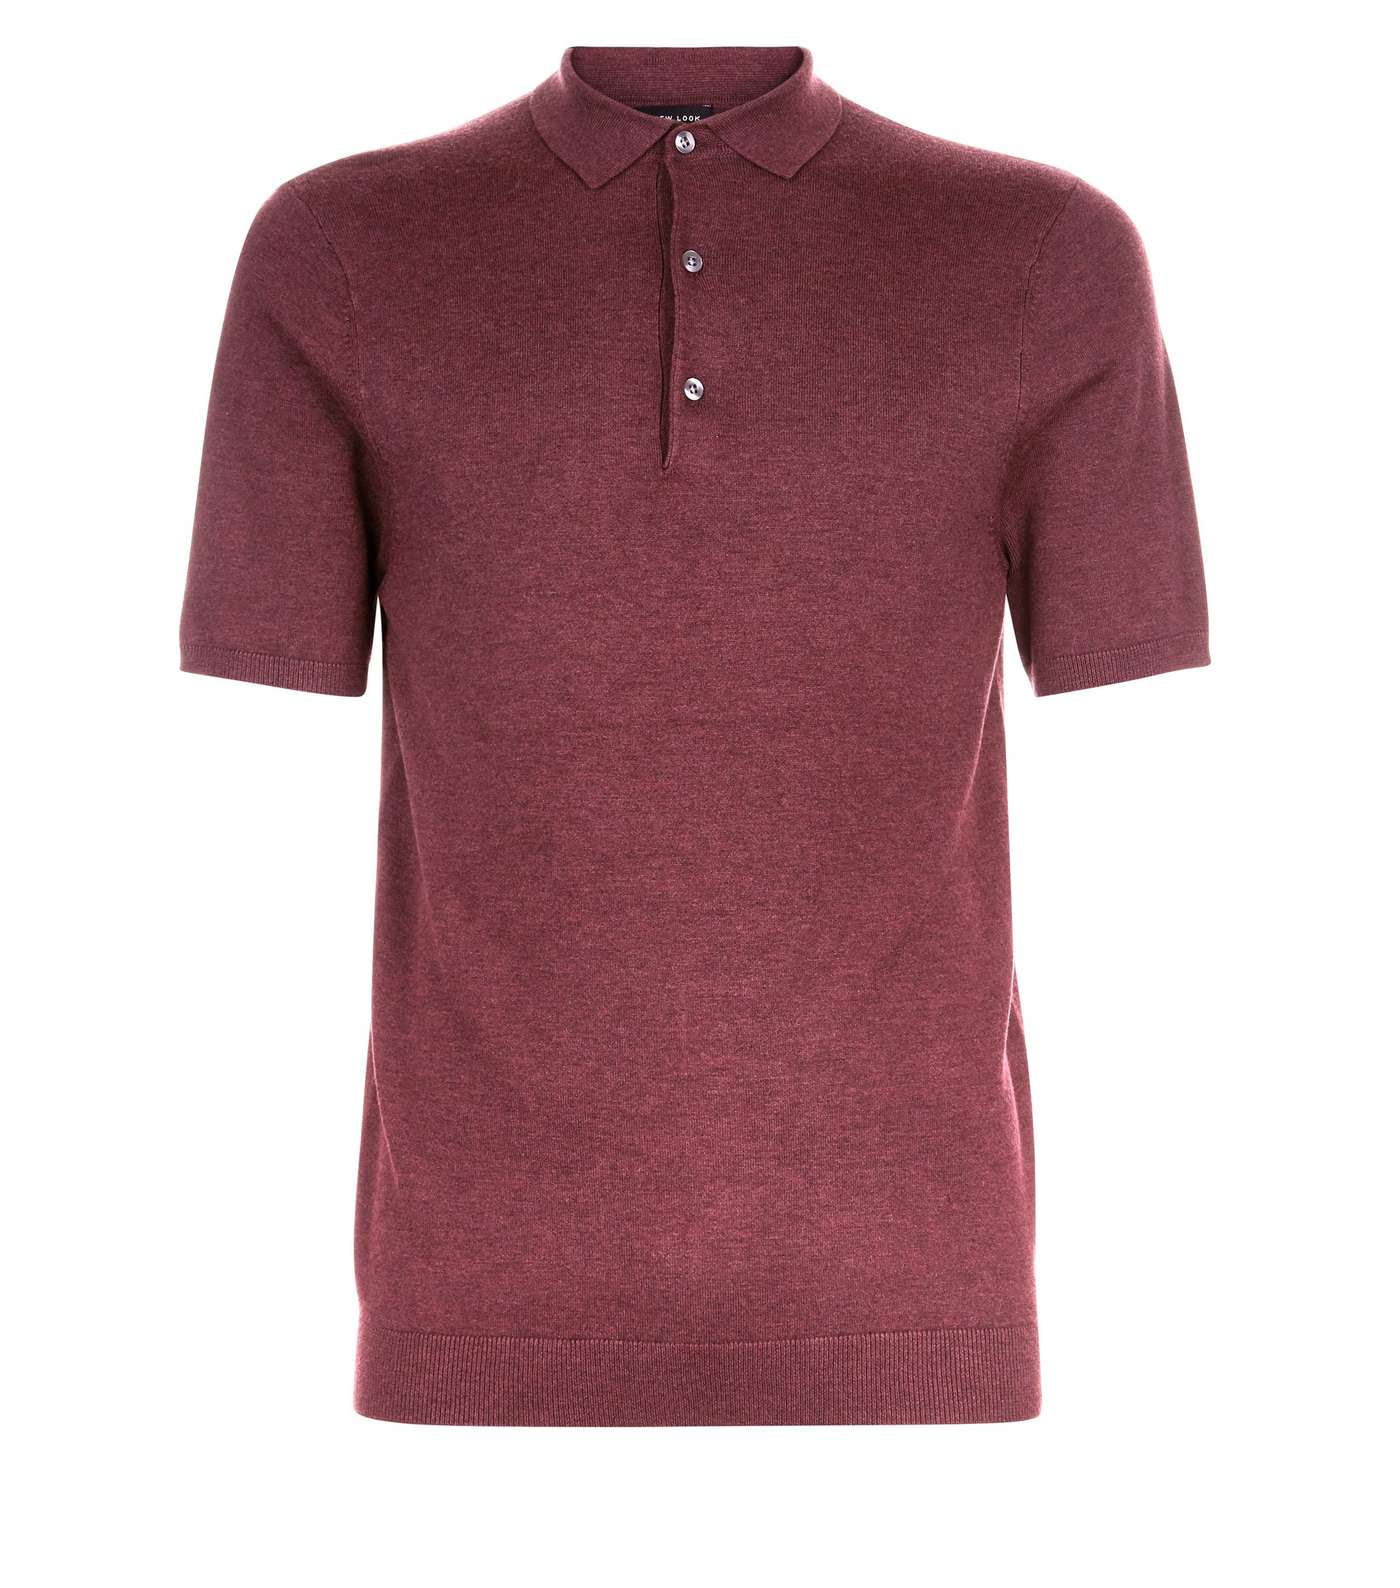 Burgundy Knitted Muscle Fit Polo Shirt Image 4